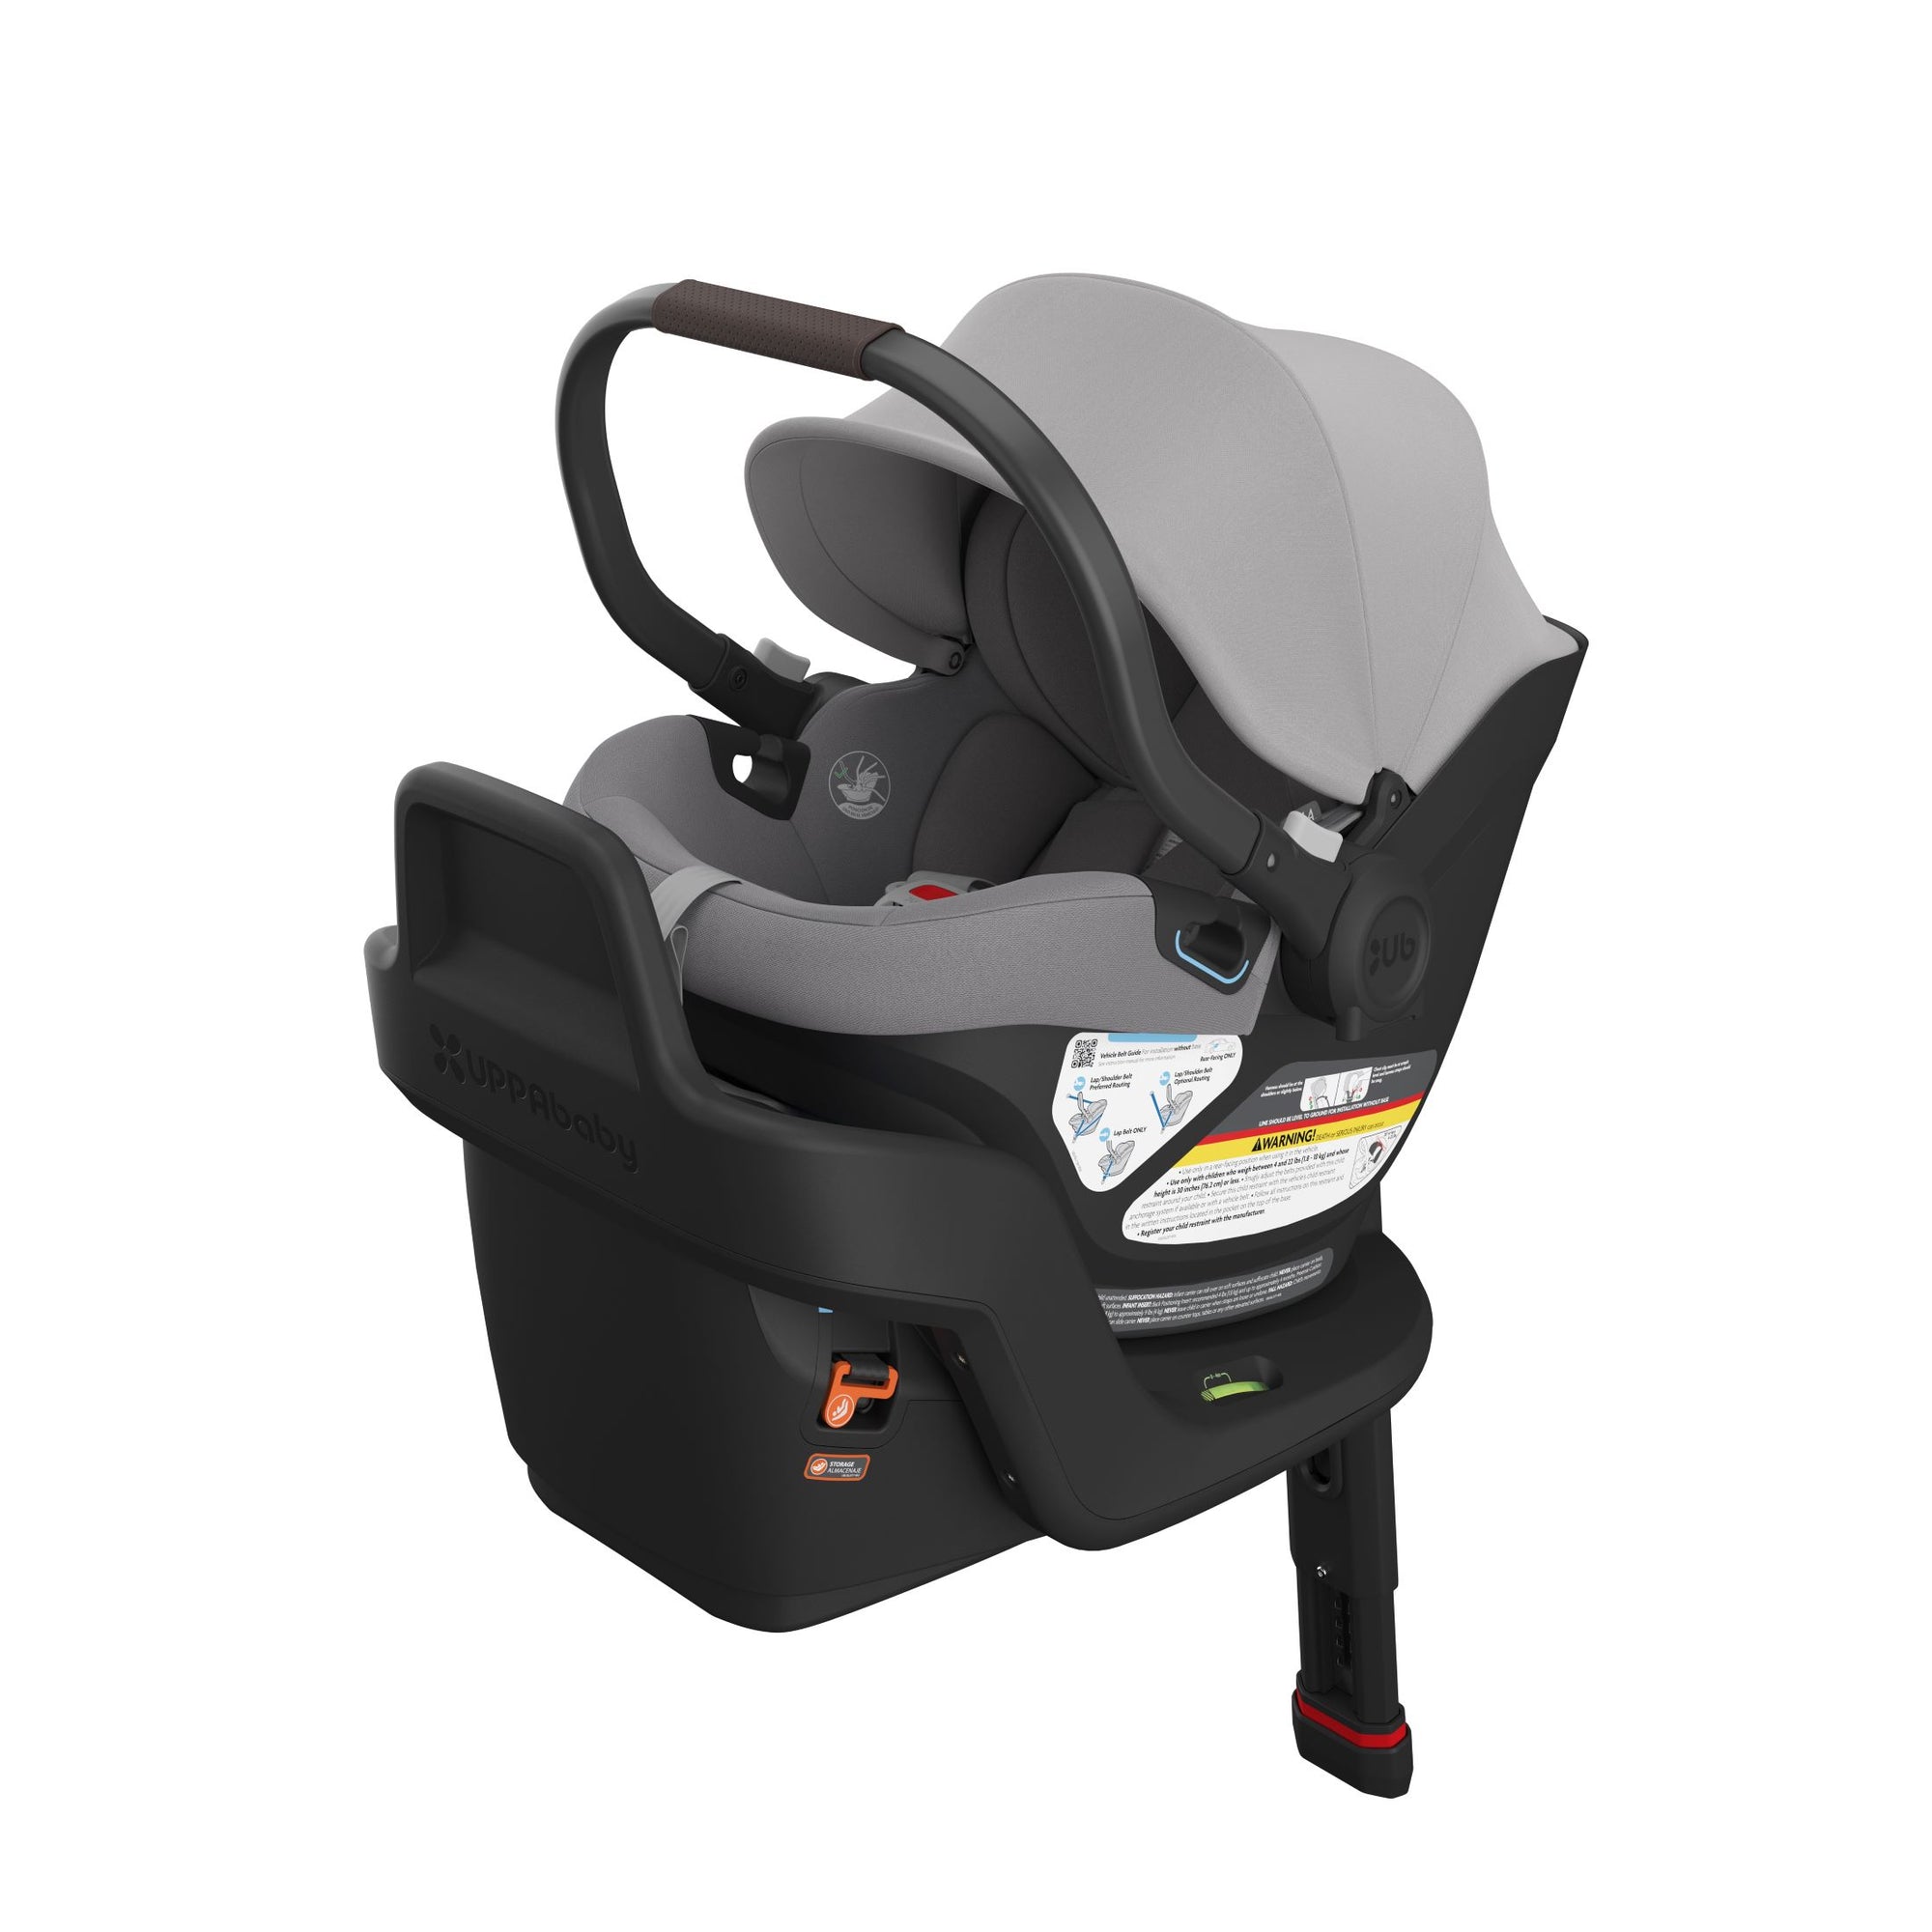 Uppababy Aria Infant Car Seat